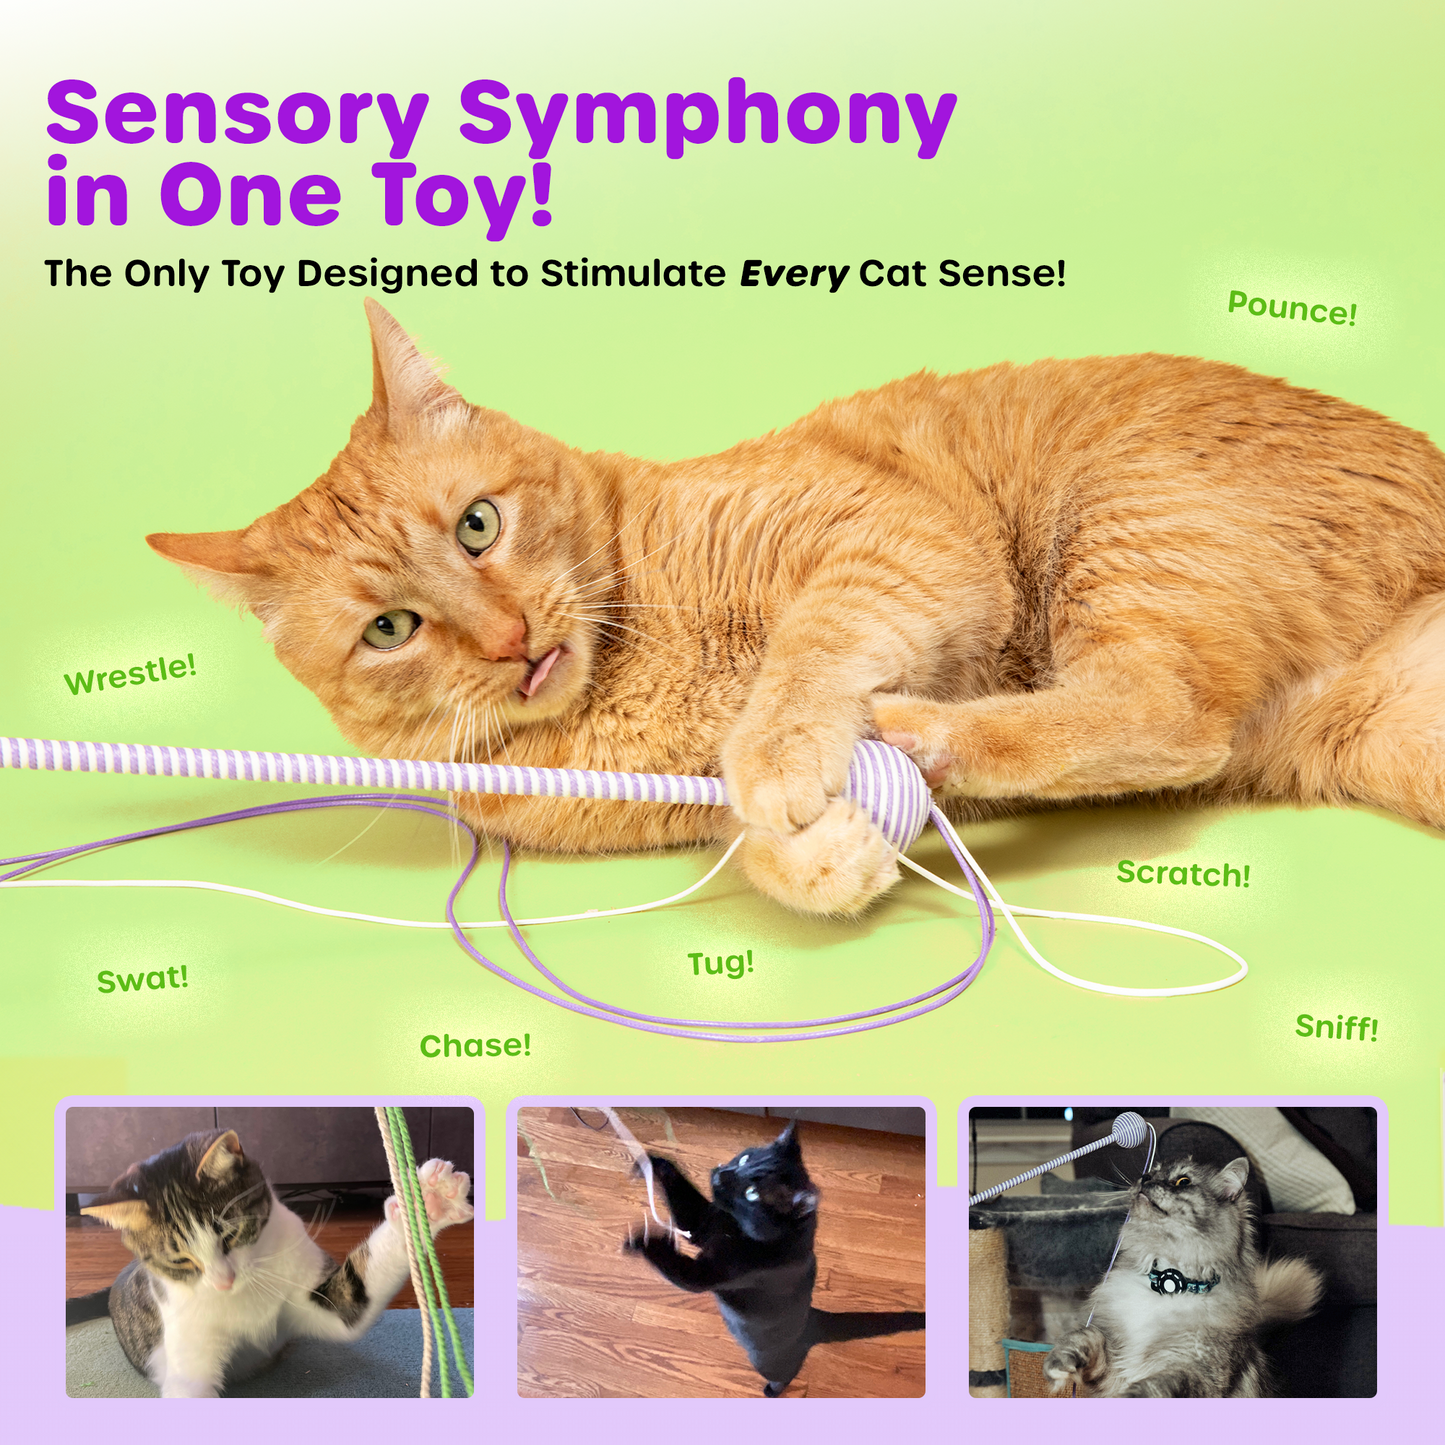 Graphic collage showing diverse cats actively playing with the Wiggle Wand™ Cat Toy, accompanied by text highlighting it as the only toy designed to stimulate all cat senses, showcasing its universal appeal and multifunctional design.